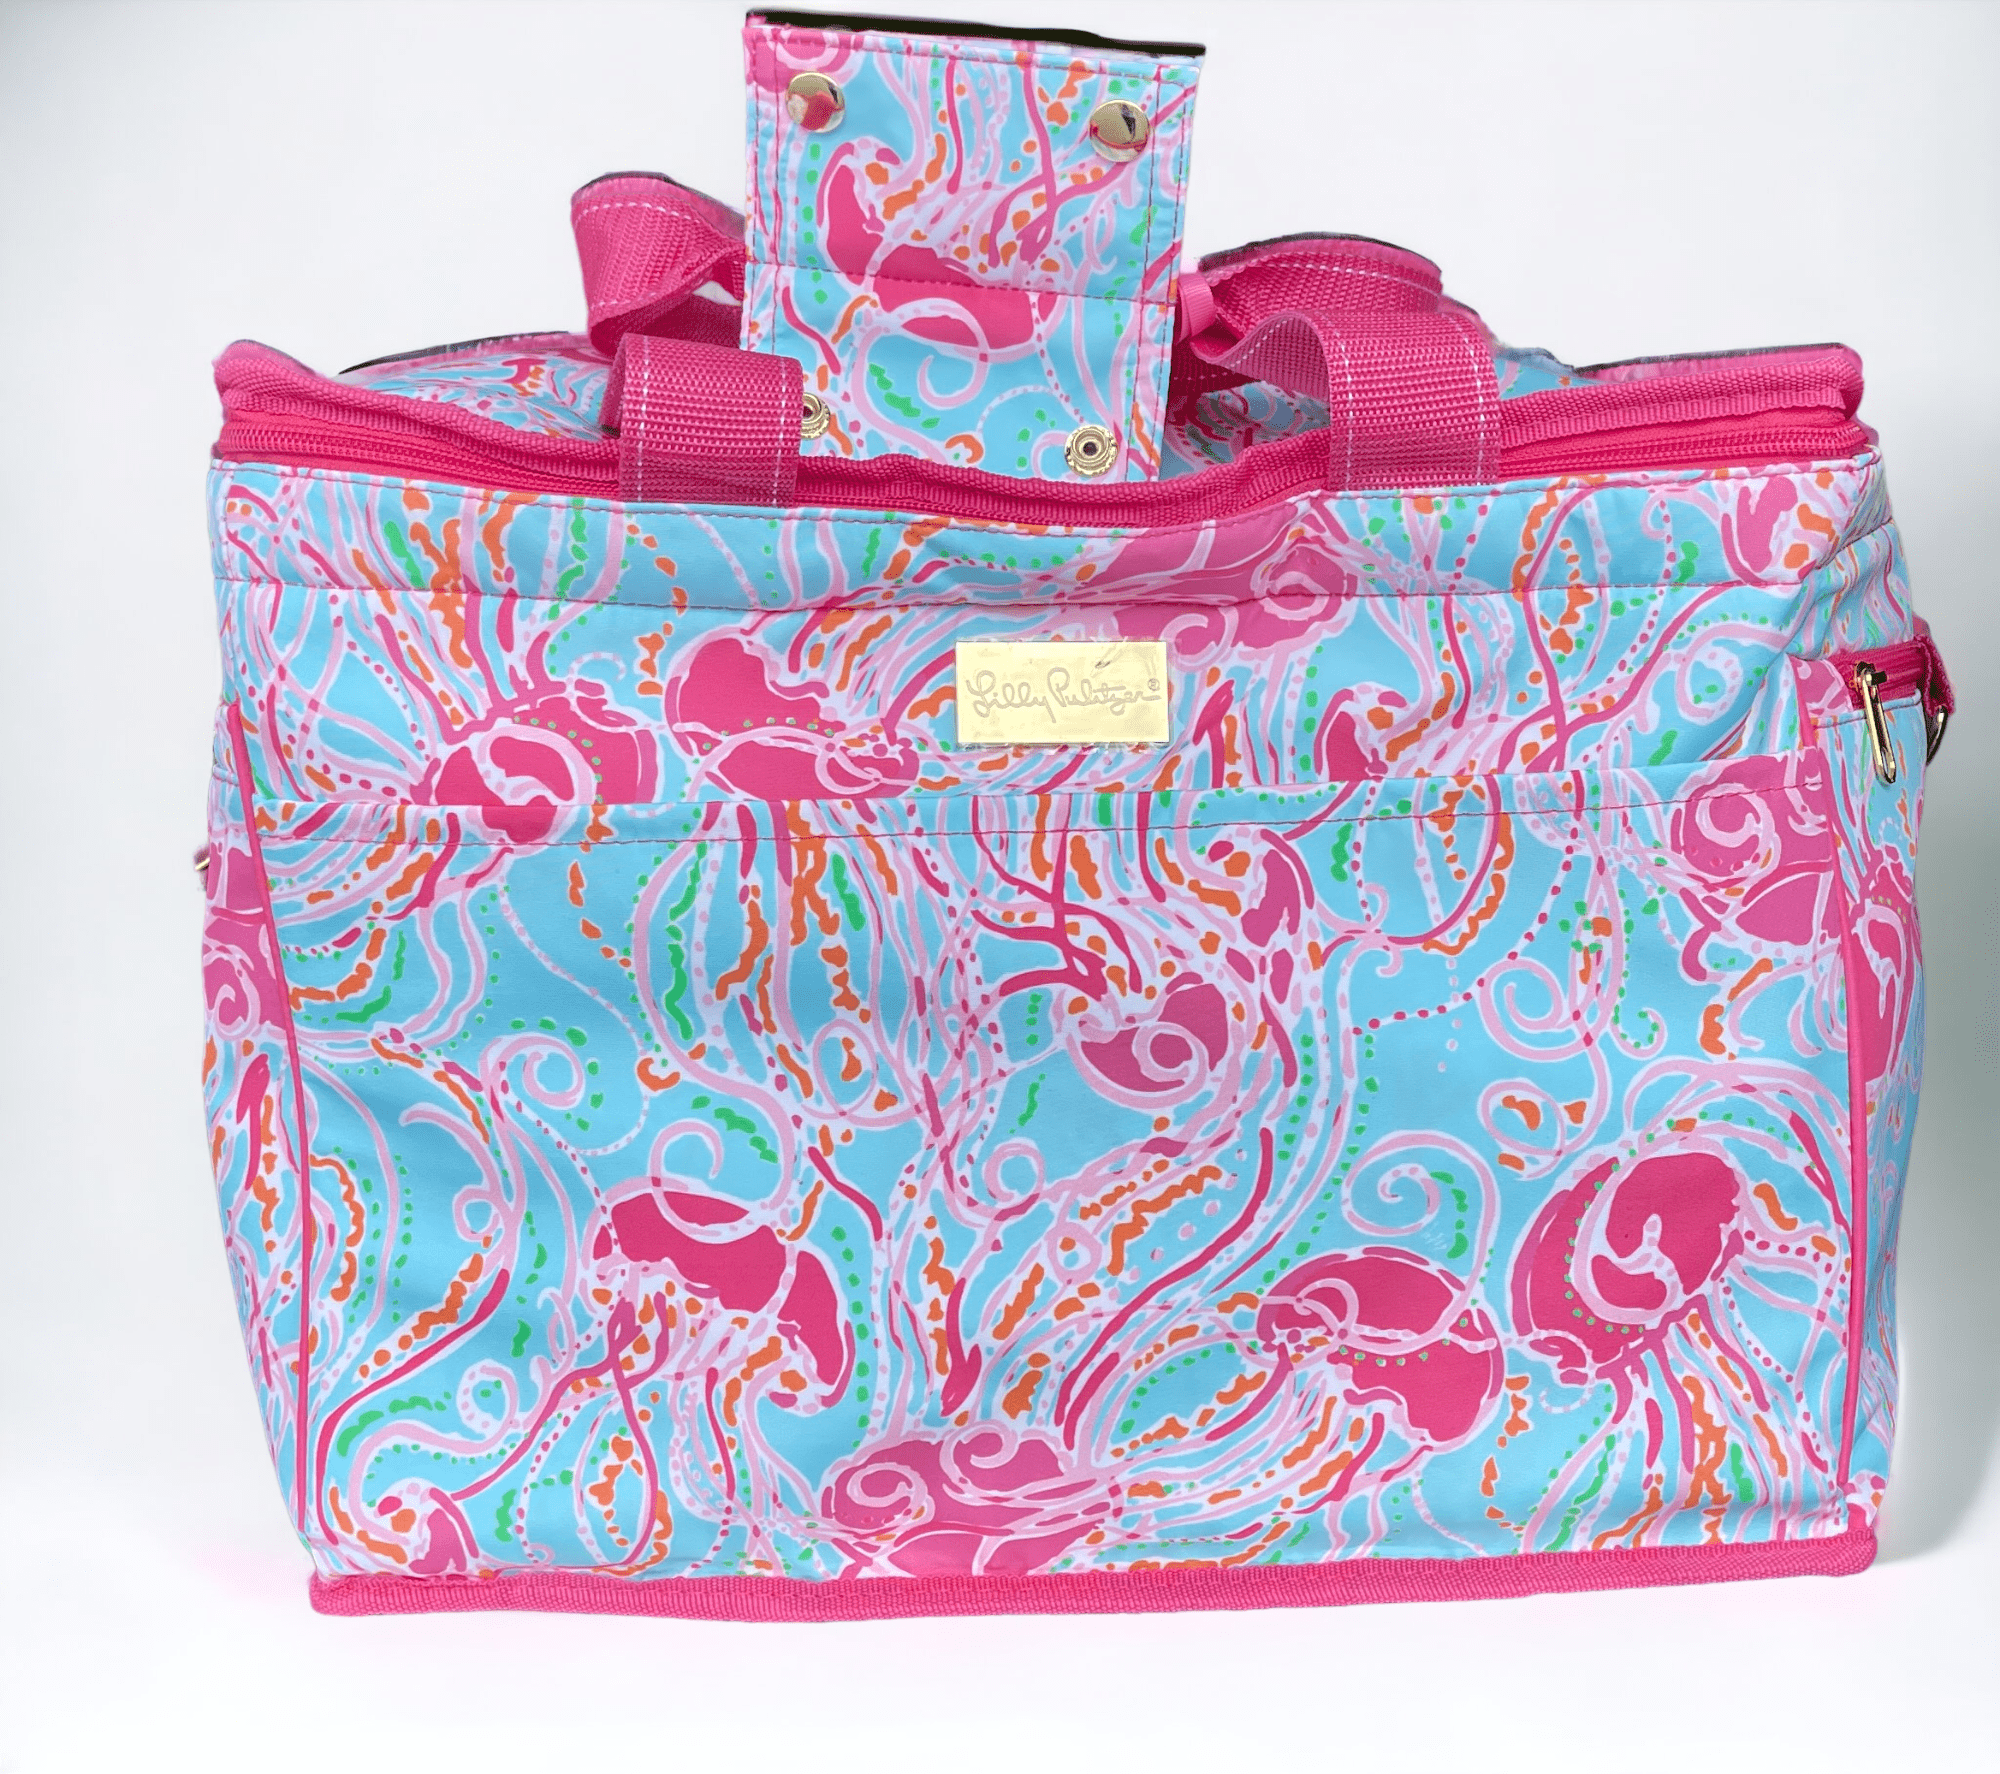 Lilly Pulitzer Beach Cooler “Jellies Be Jammin'” Print - Pretty Crafty Lady Shop